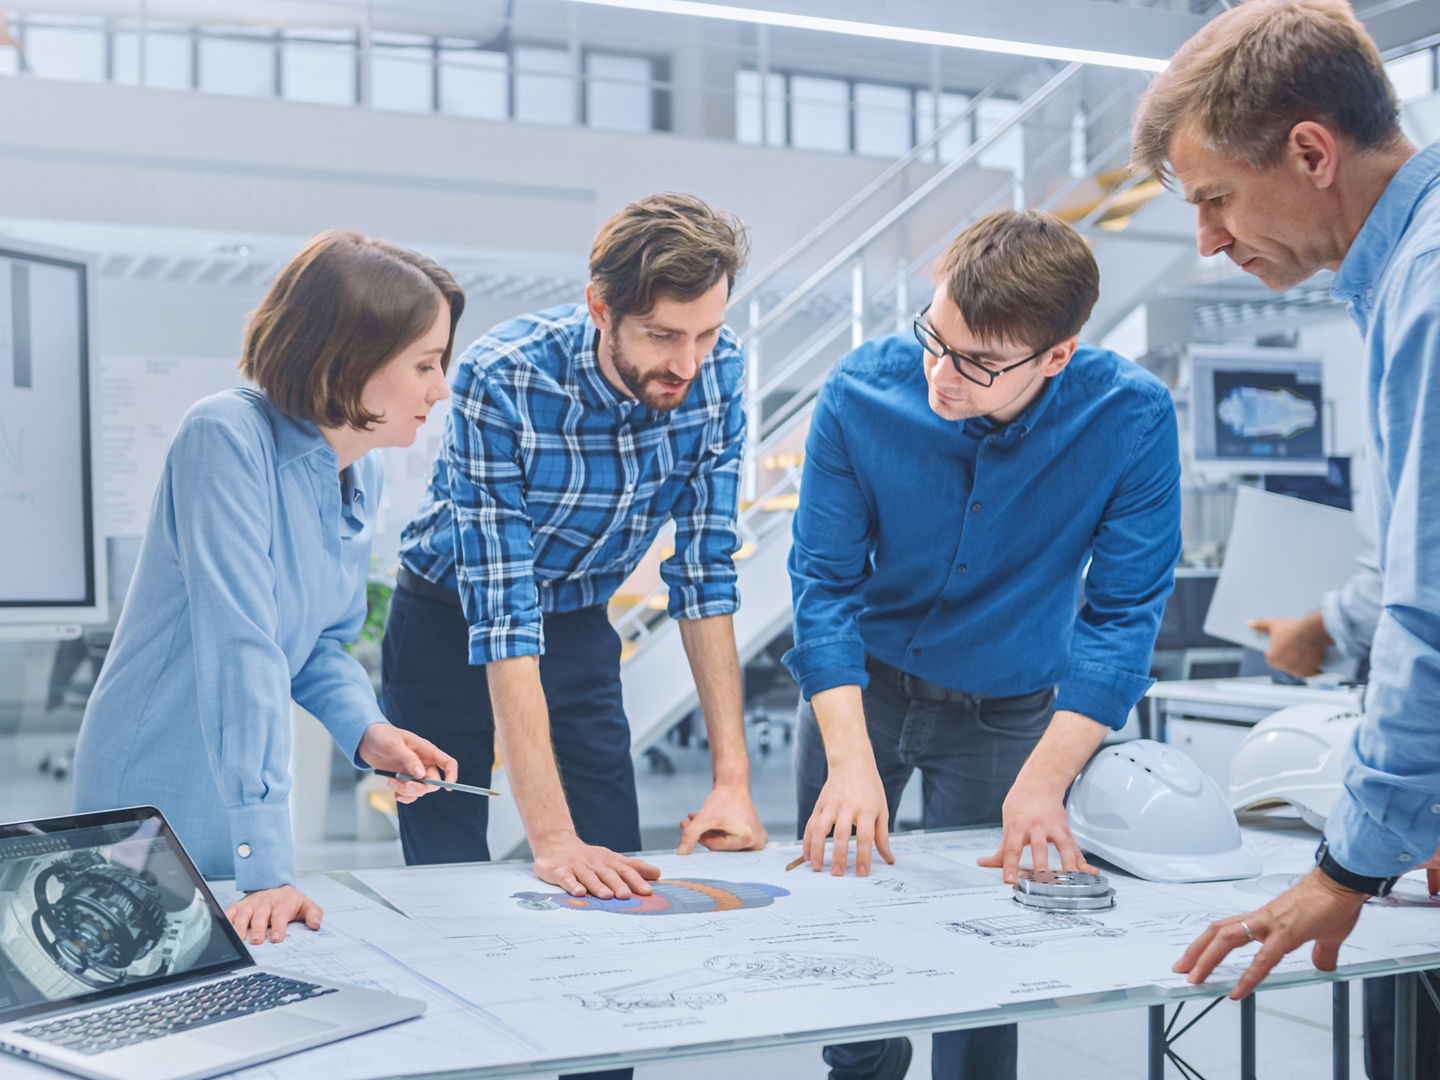 In the Industrial Engineering Facility: Diverse Group of Engineers and Technicians on a Meeting Gather Around Table with Engine Design Technical Drafts, Have Discussion, Analyse Technology